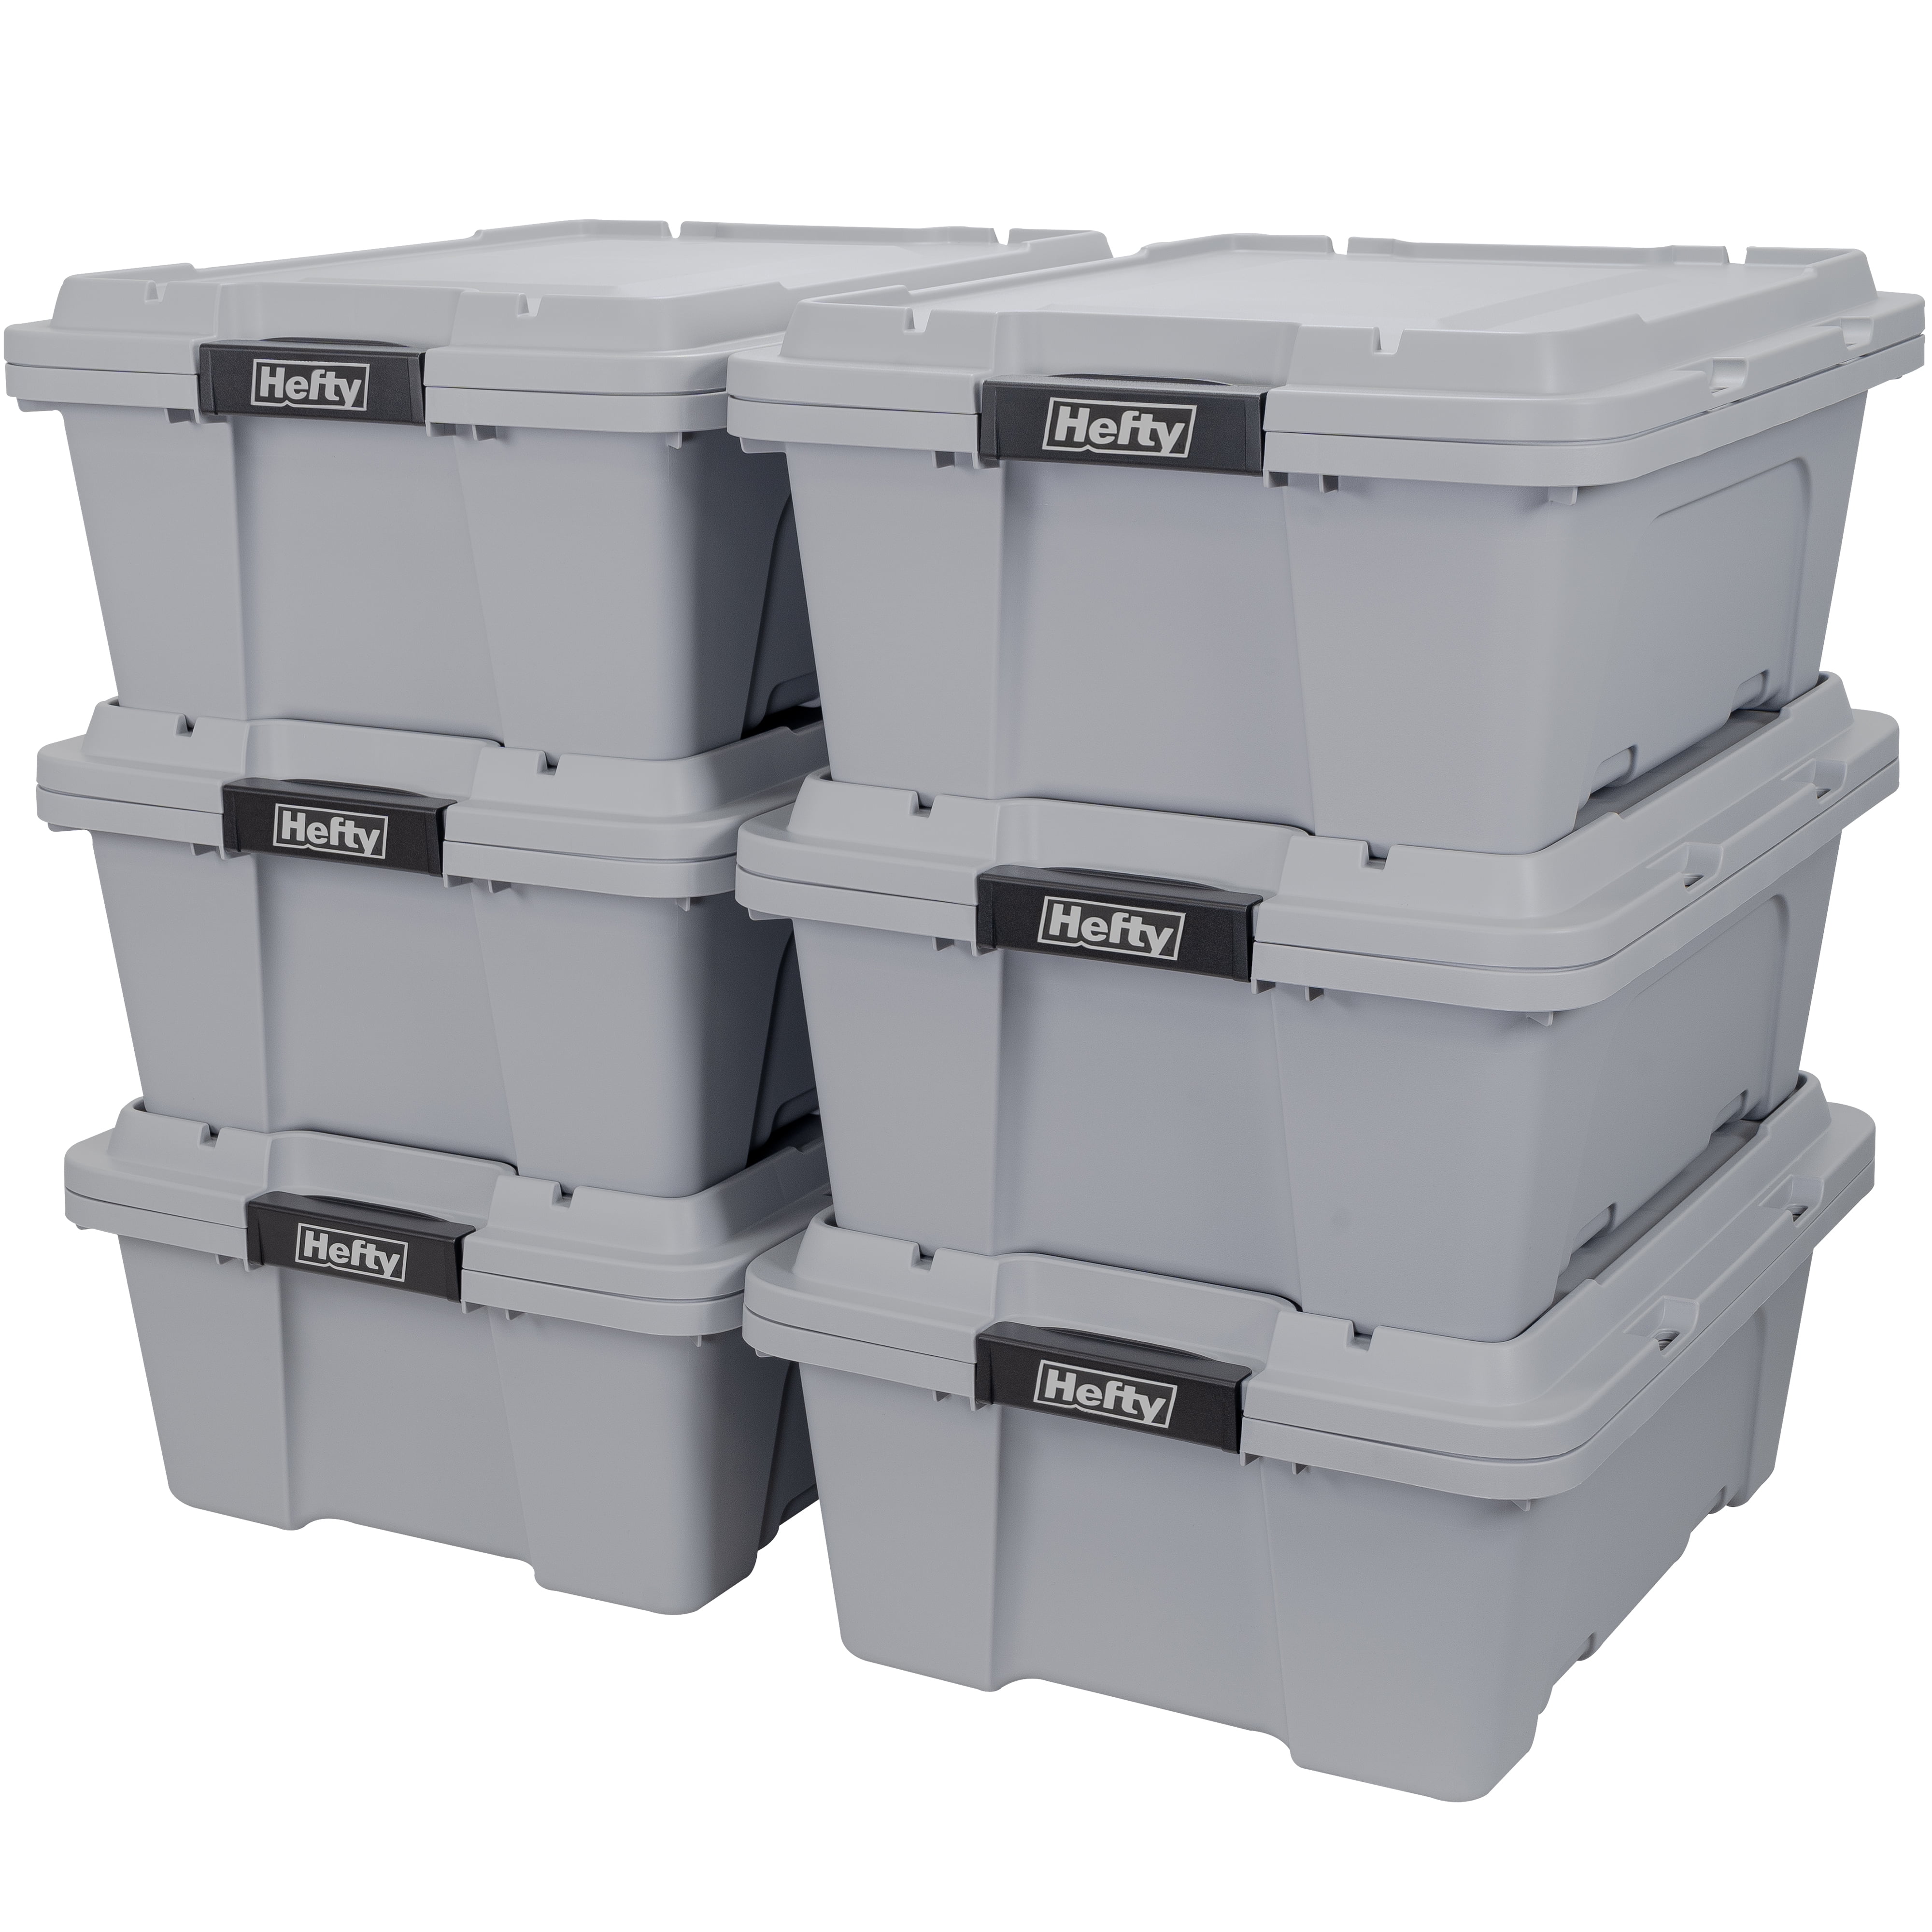 CeilBlue Extra Large Storage Tote with Lid 26.9 L x 17 W x 12.6 H - Gray